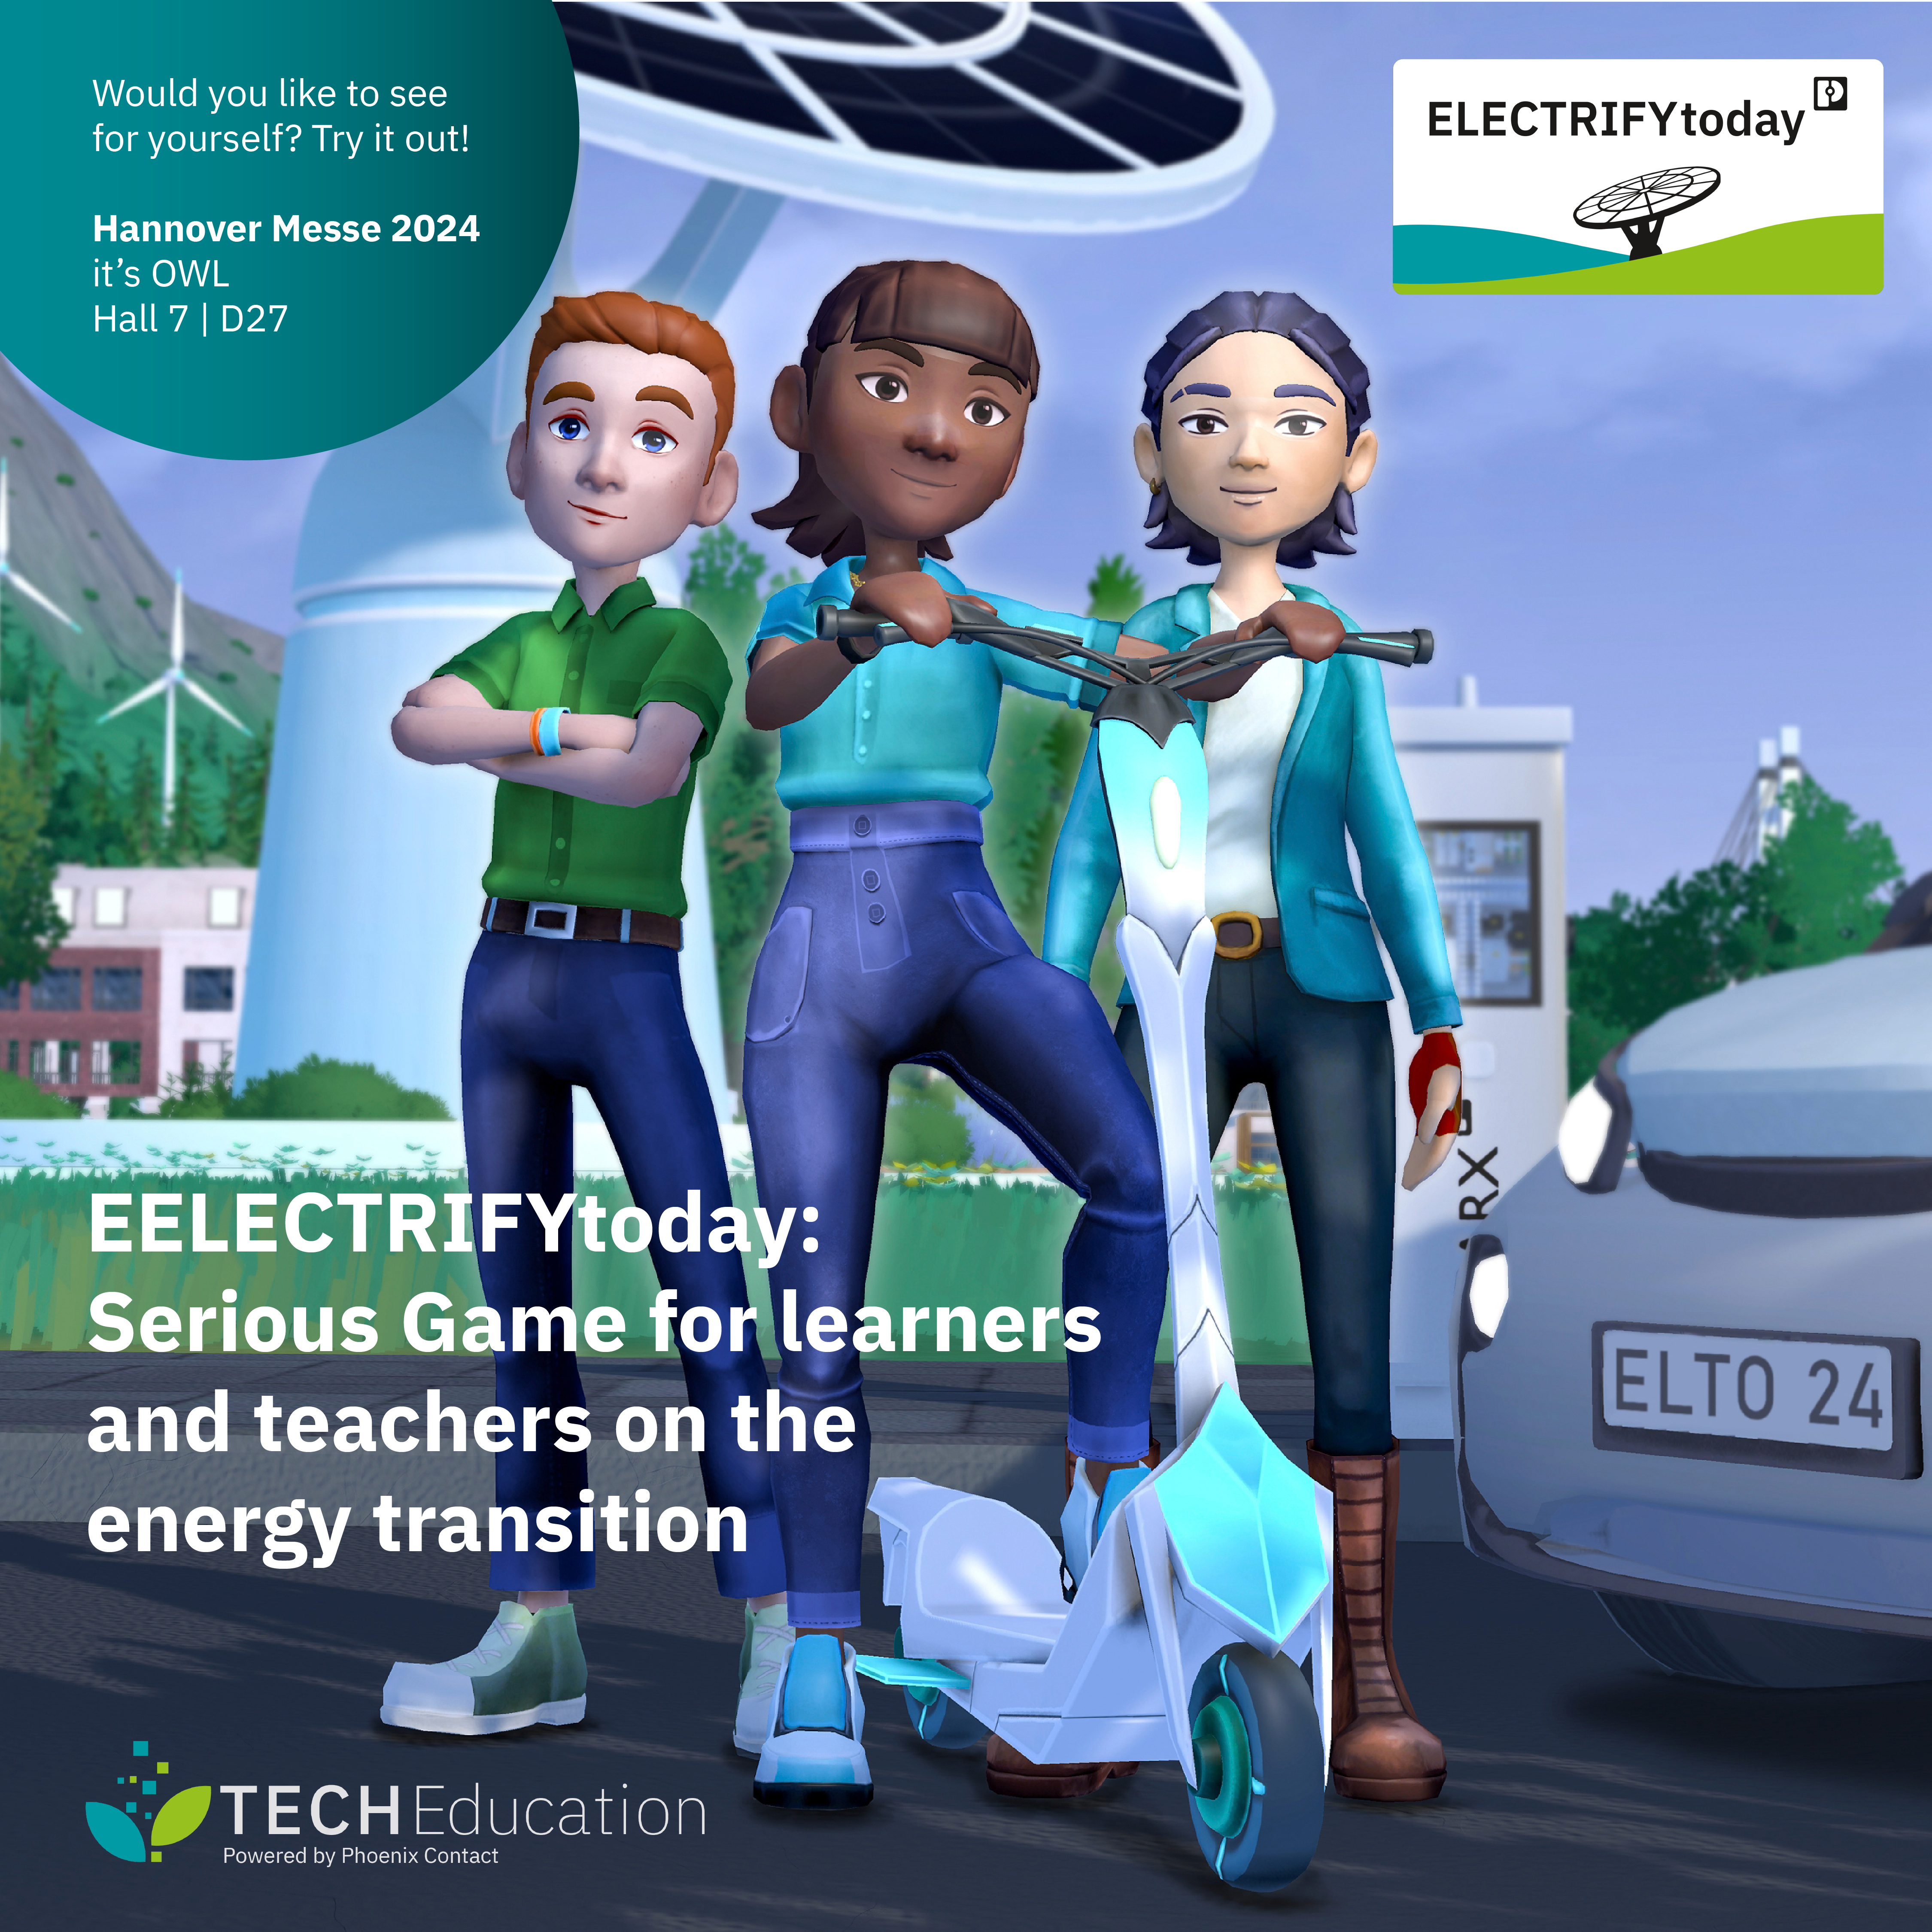 ELECTRIFYtoday: Test the online game on the energy transition for the first time at Hannover Messe 2024